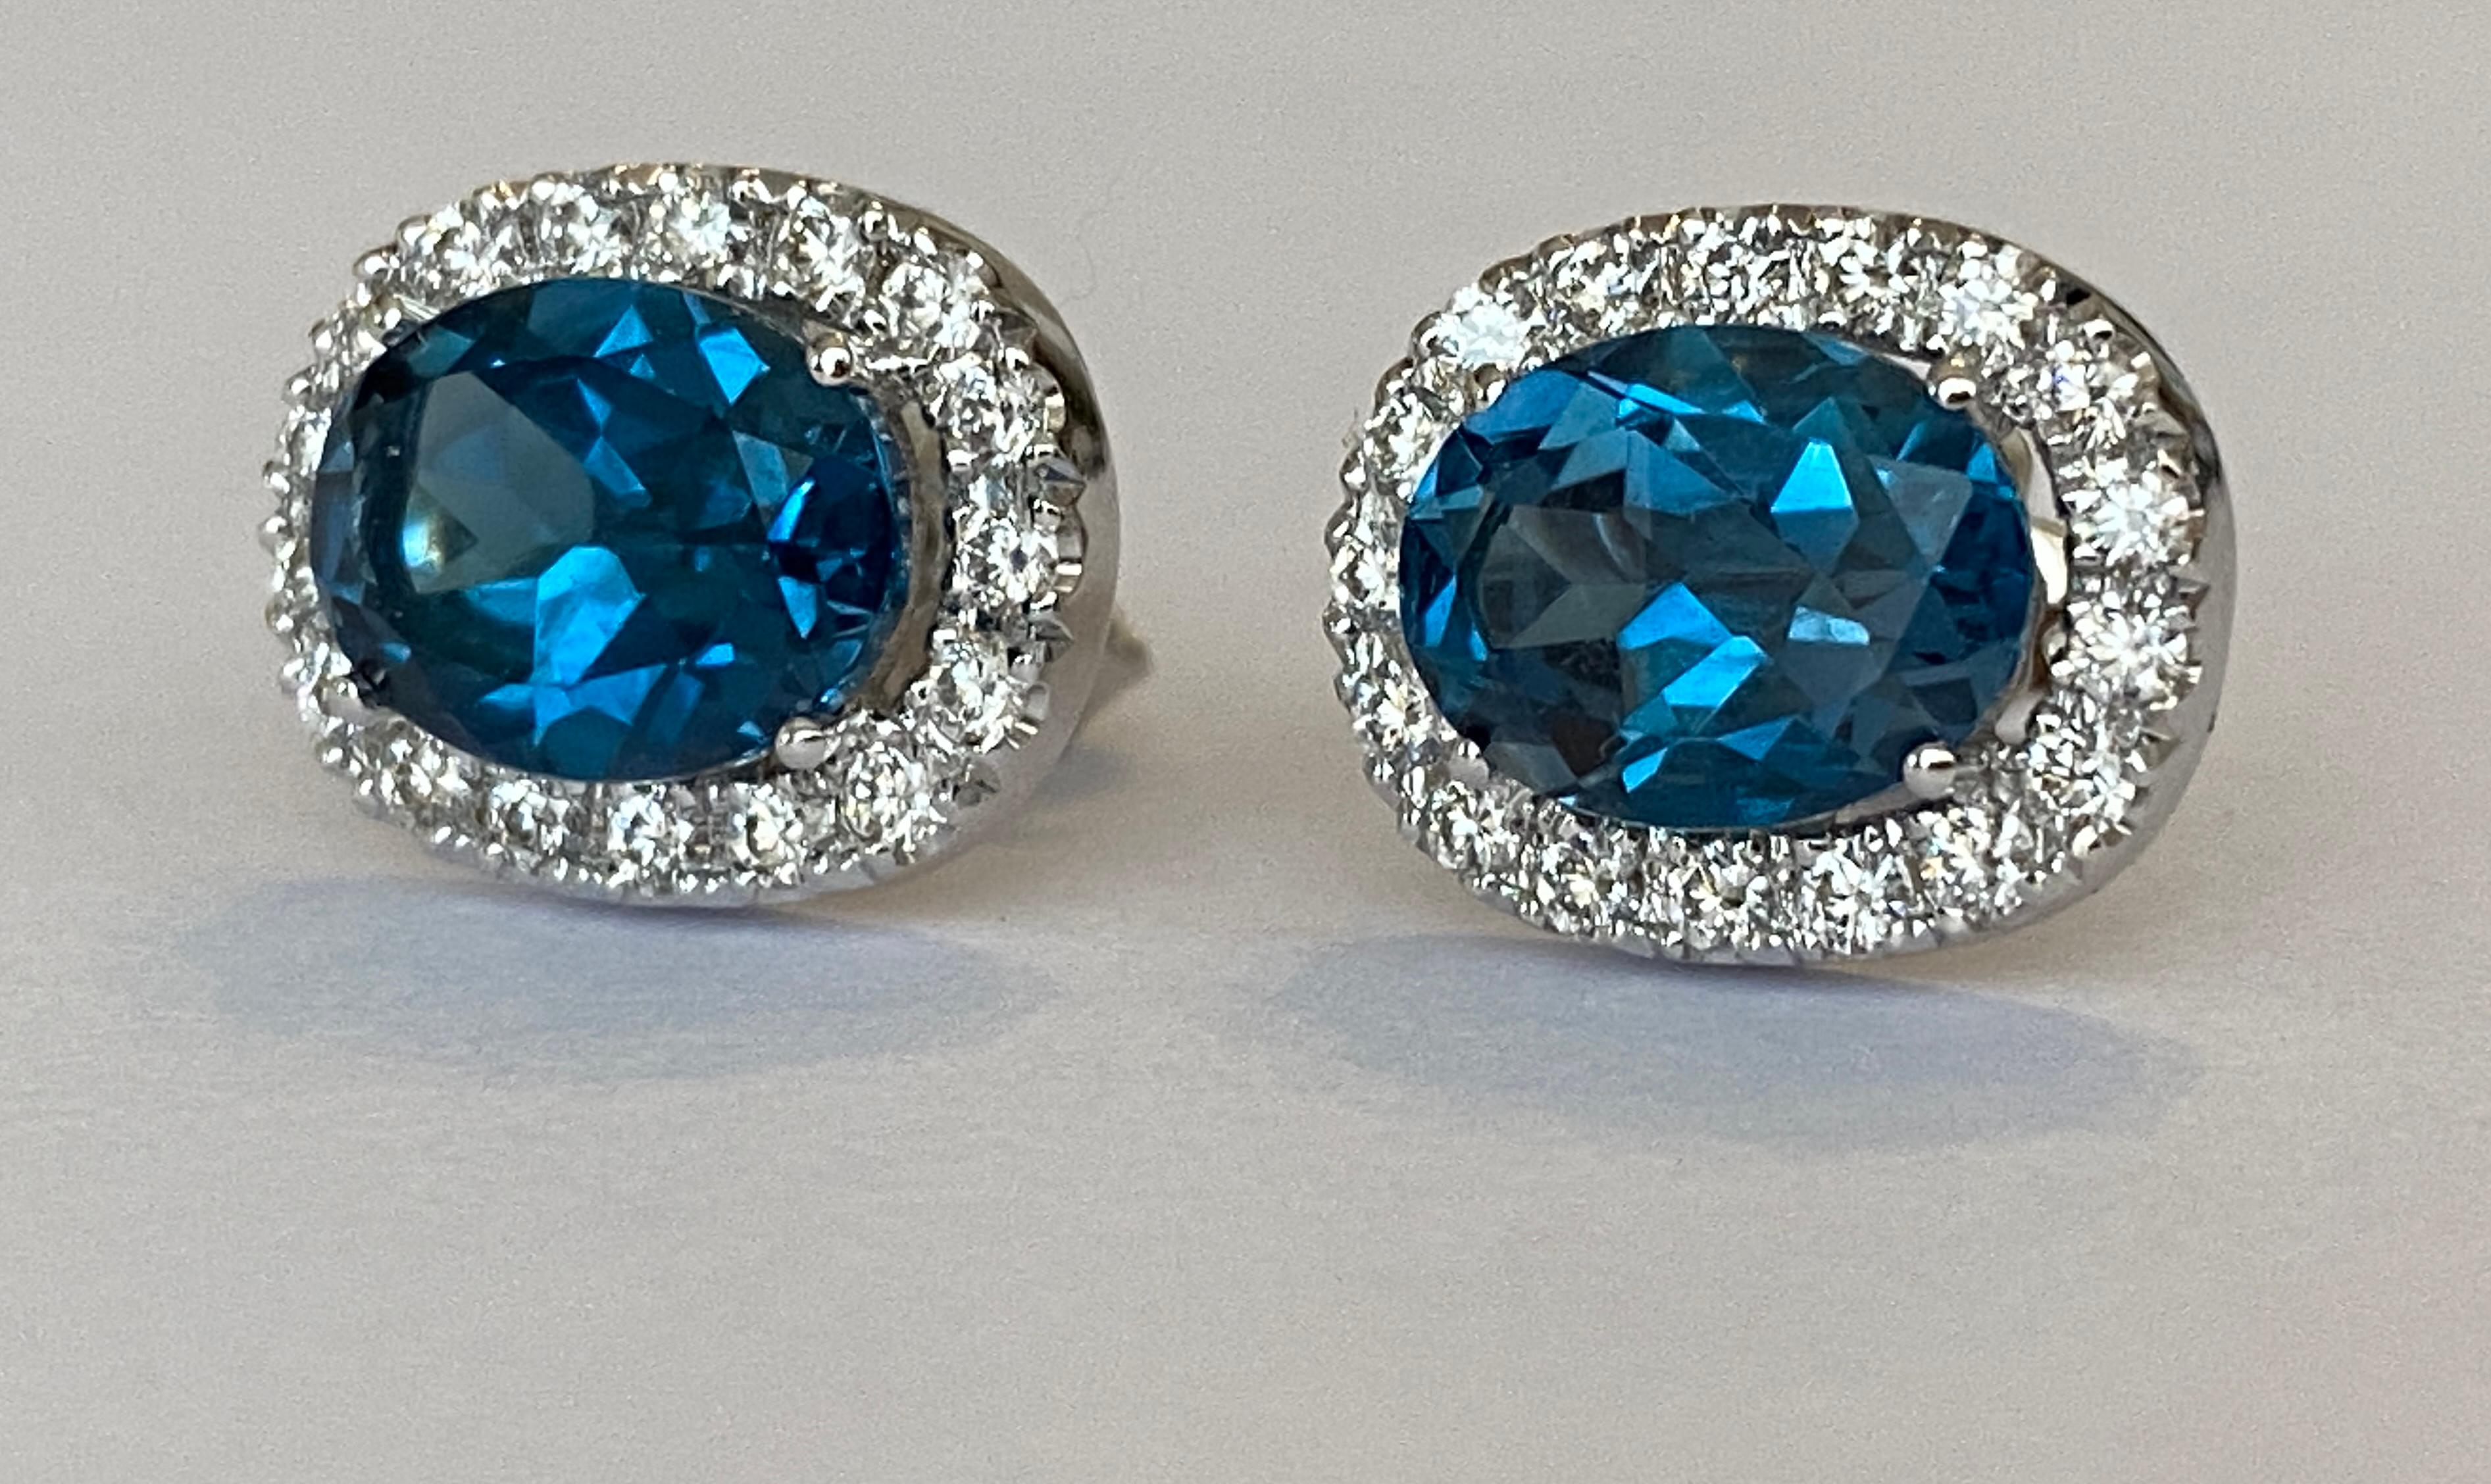 Contemporary 18 kt white gold Diamond earrings studs with London Blue Topaz For Sale